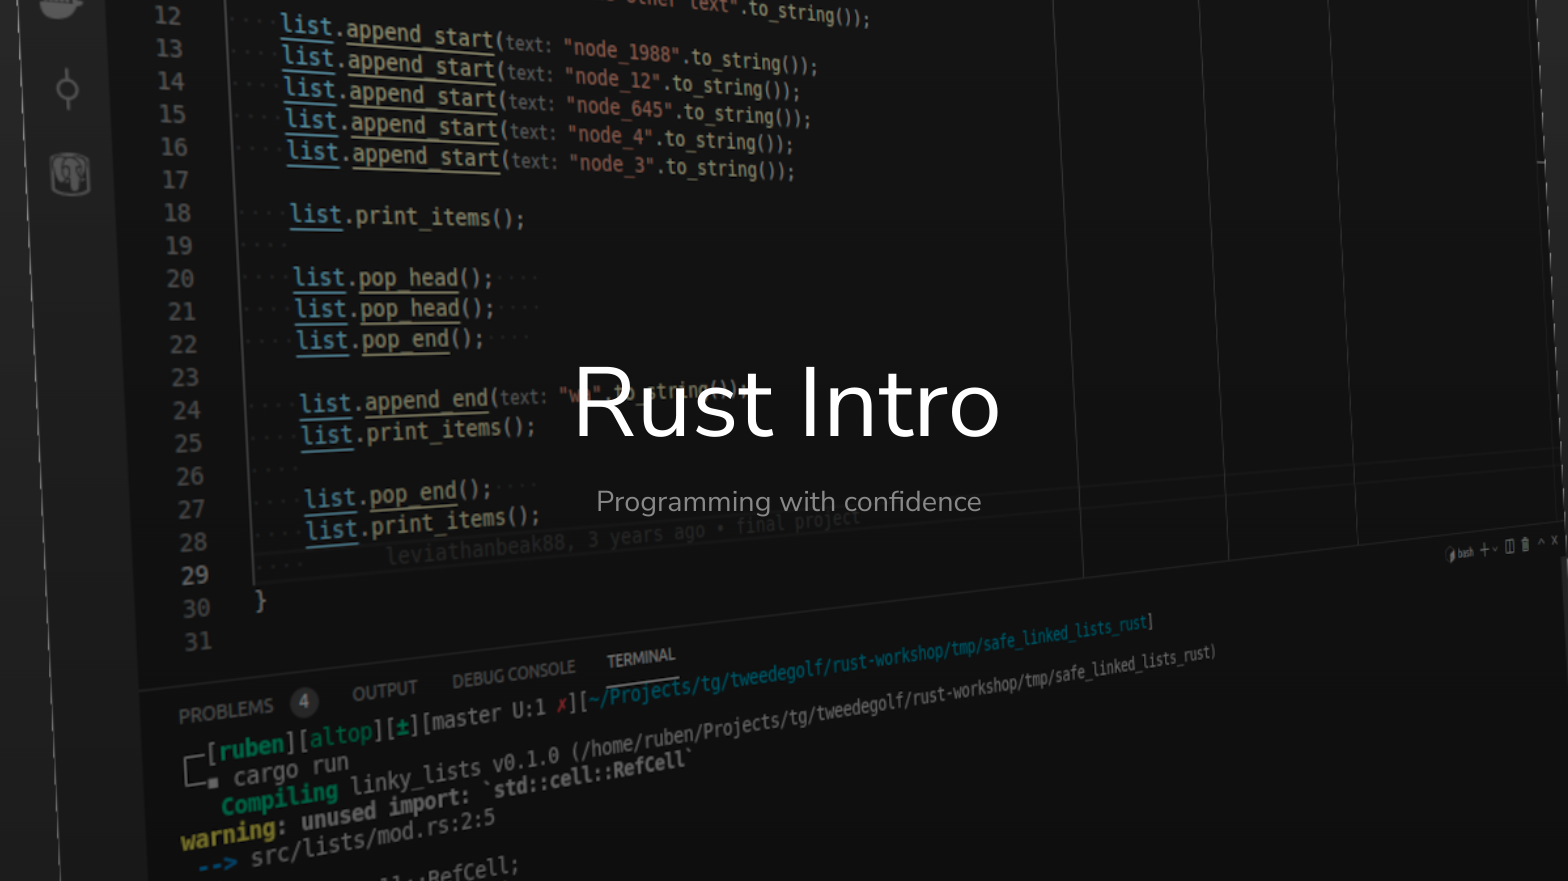 Introducing Rust in security research